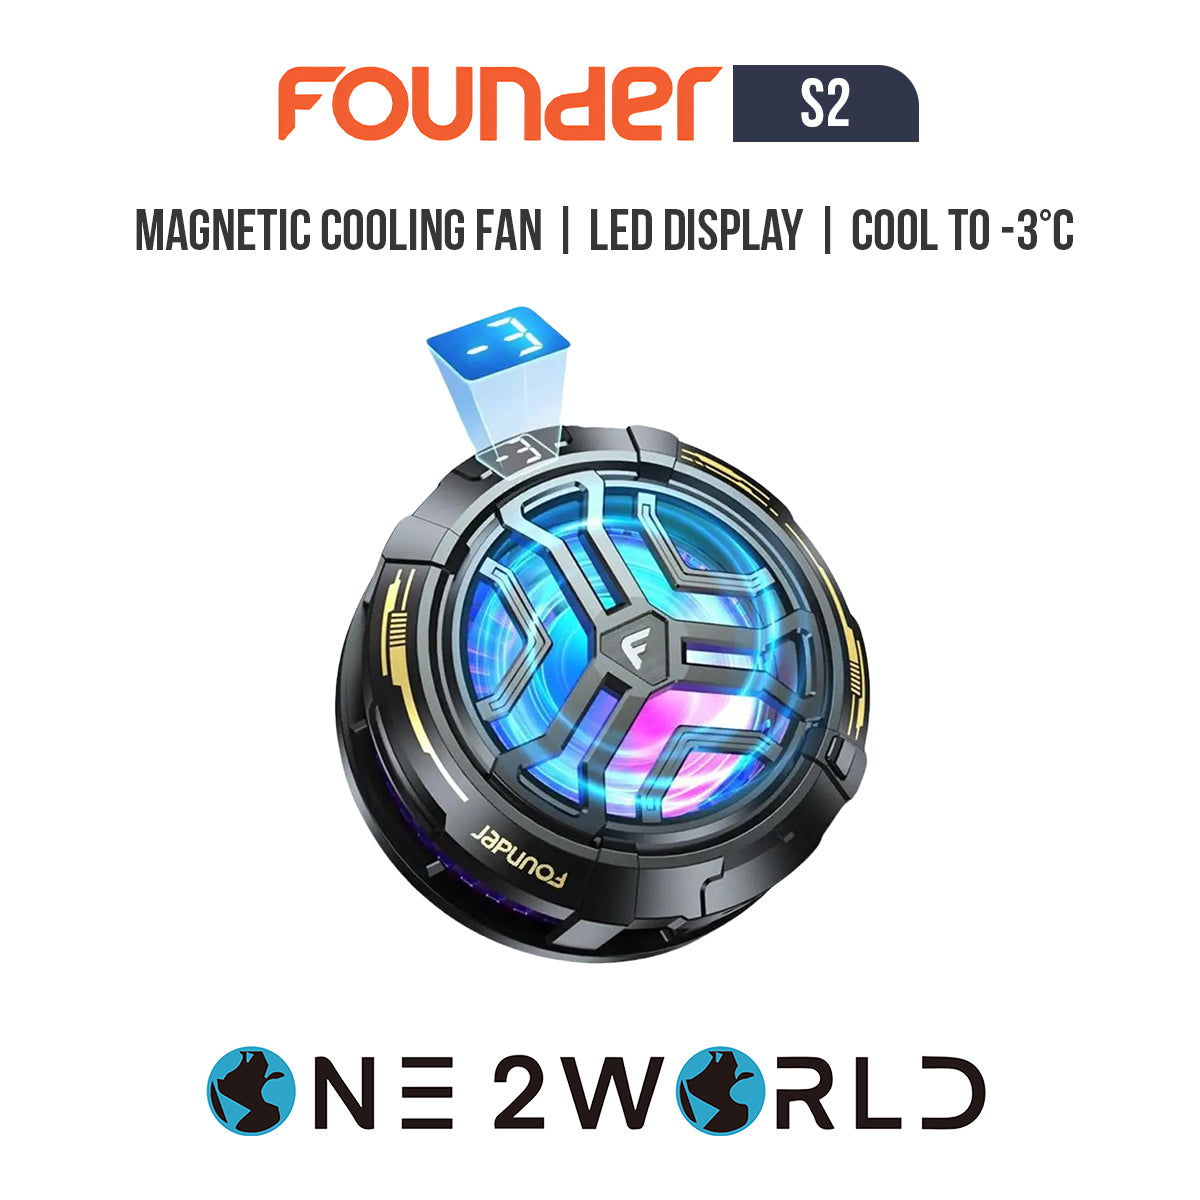 O2W SELECTION FOUNDER S2 Magnetic Phone Cooling Fan